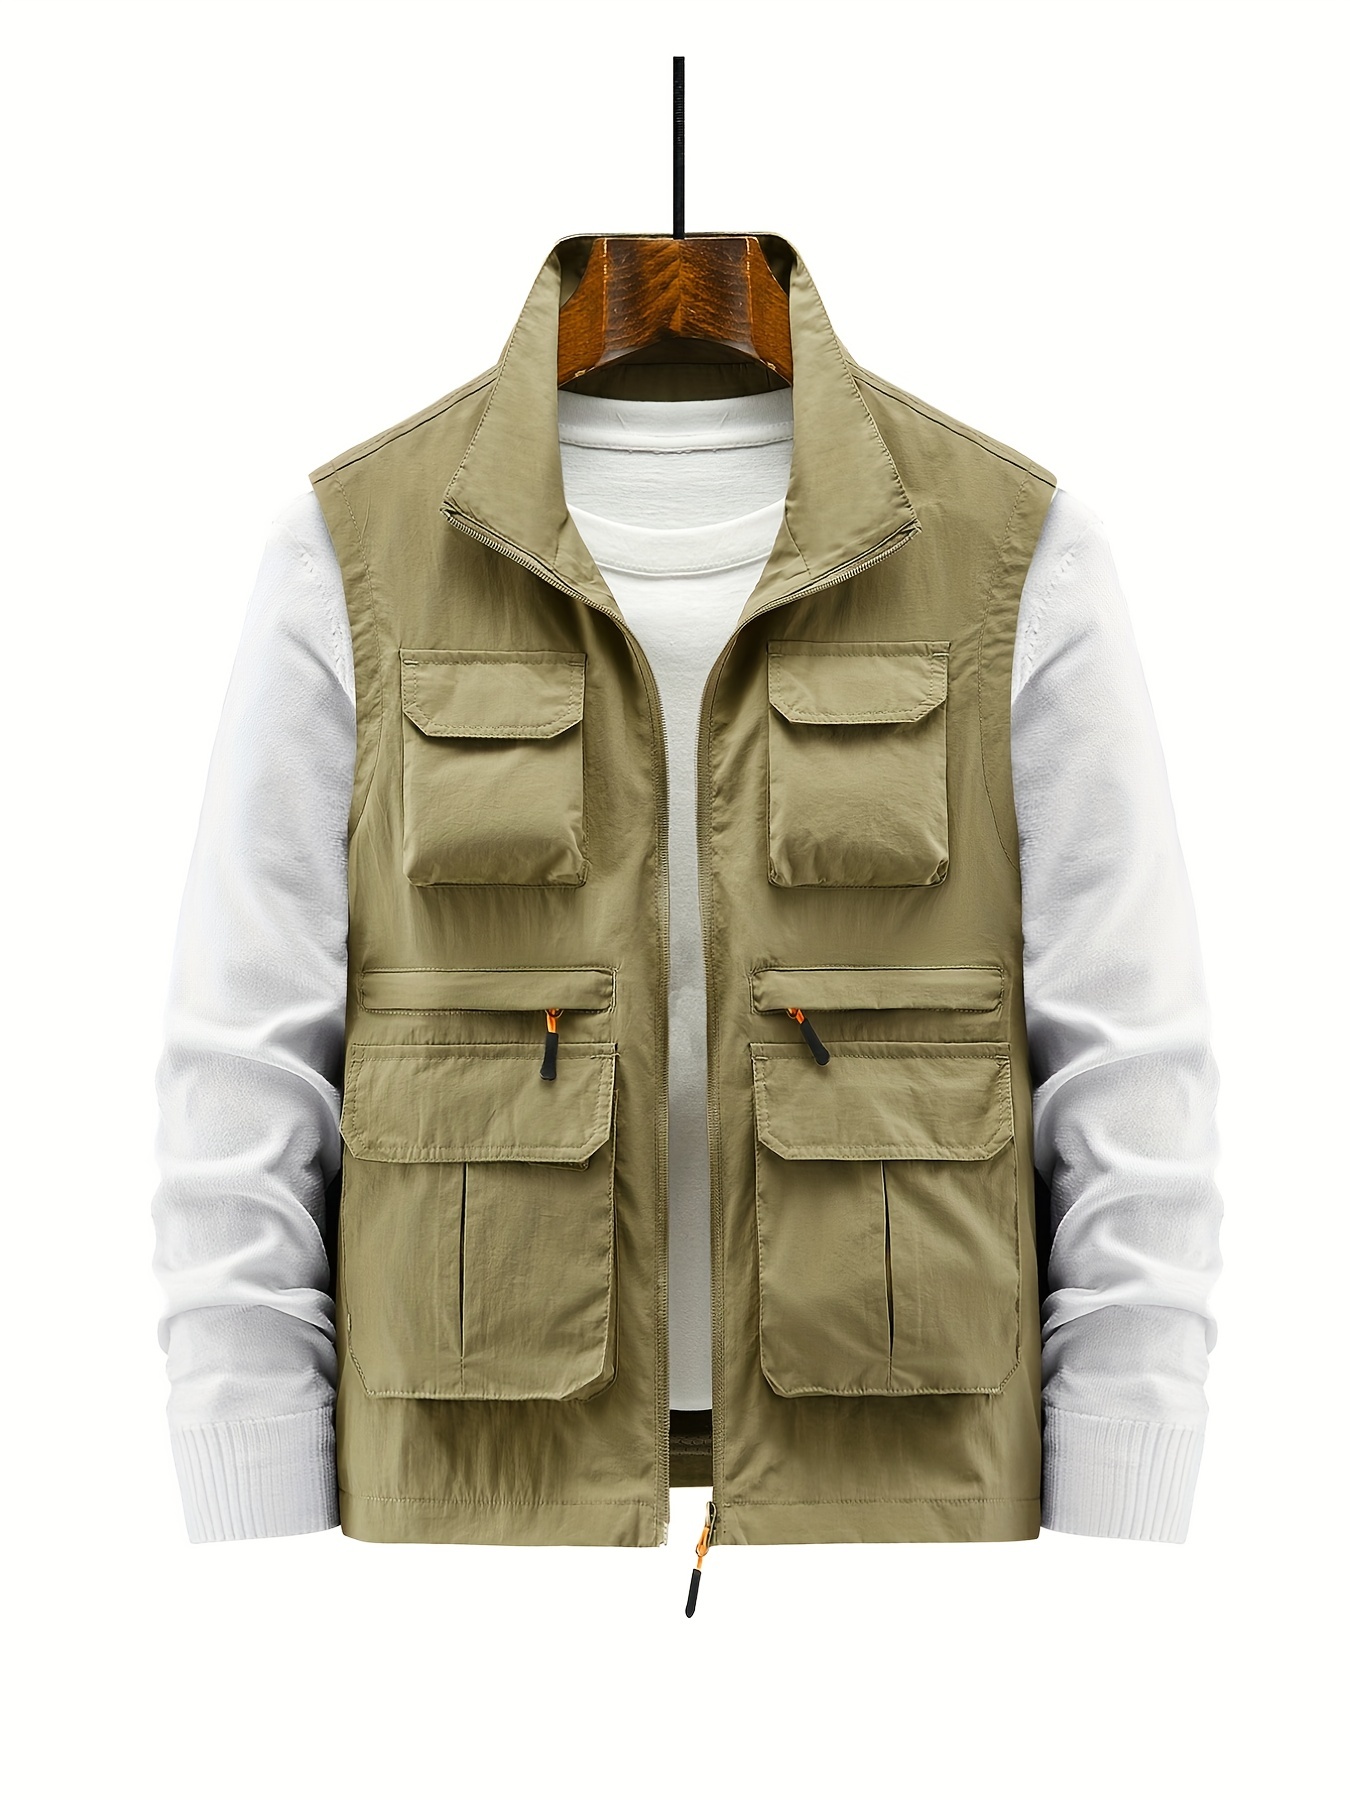 Multi Zipper Pockets Vest, Men's Casual Stand Collar Zip Up Vest for Spring Summer Outdoor Fishing Hiking,Casual,Temu